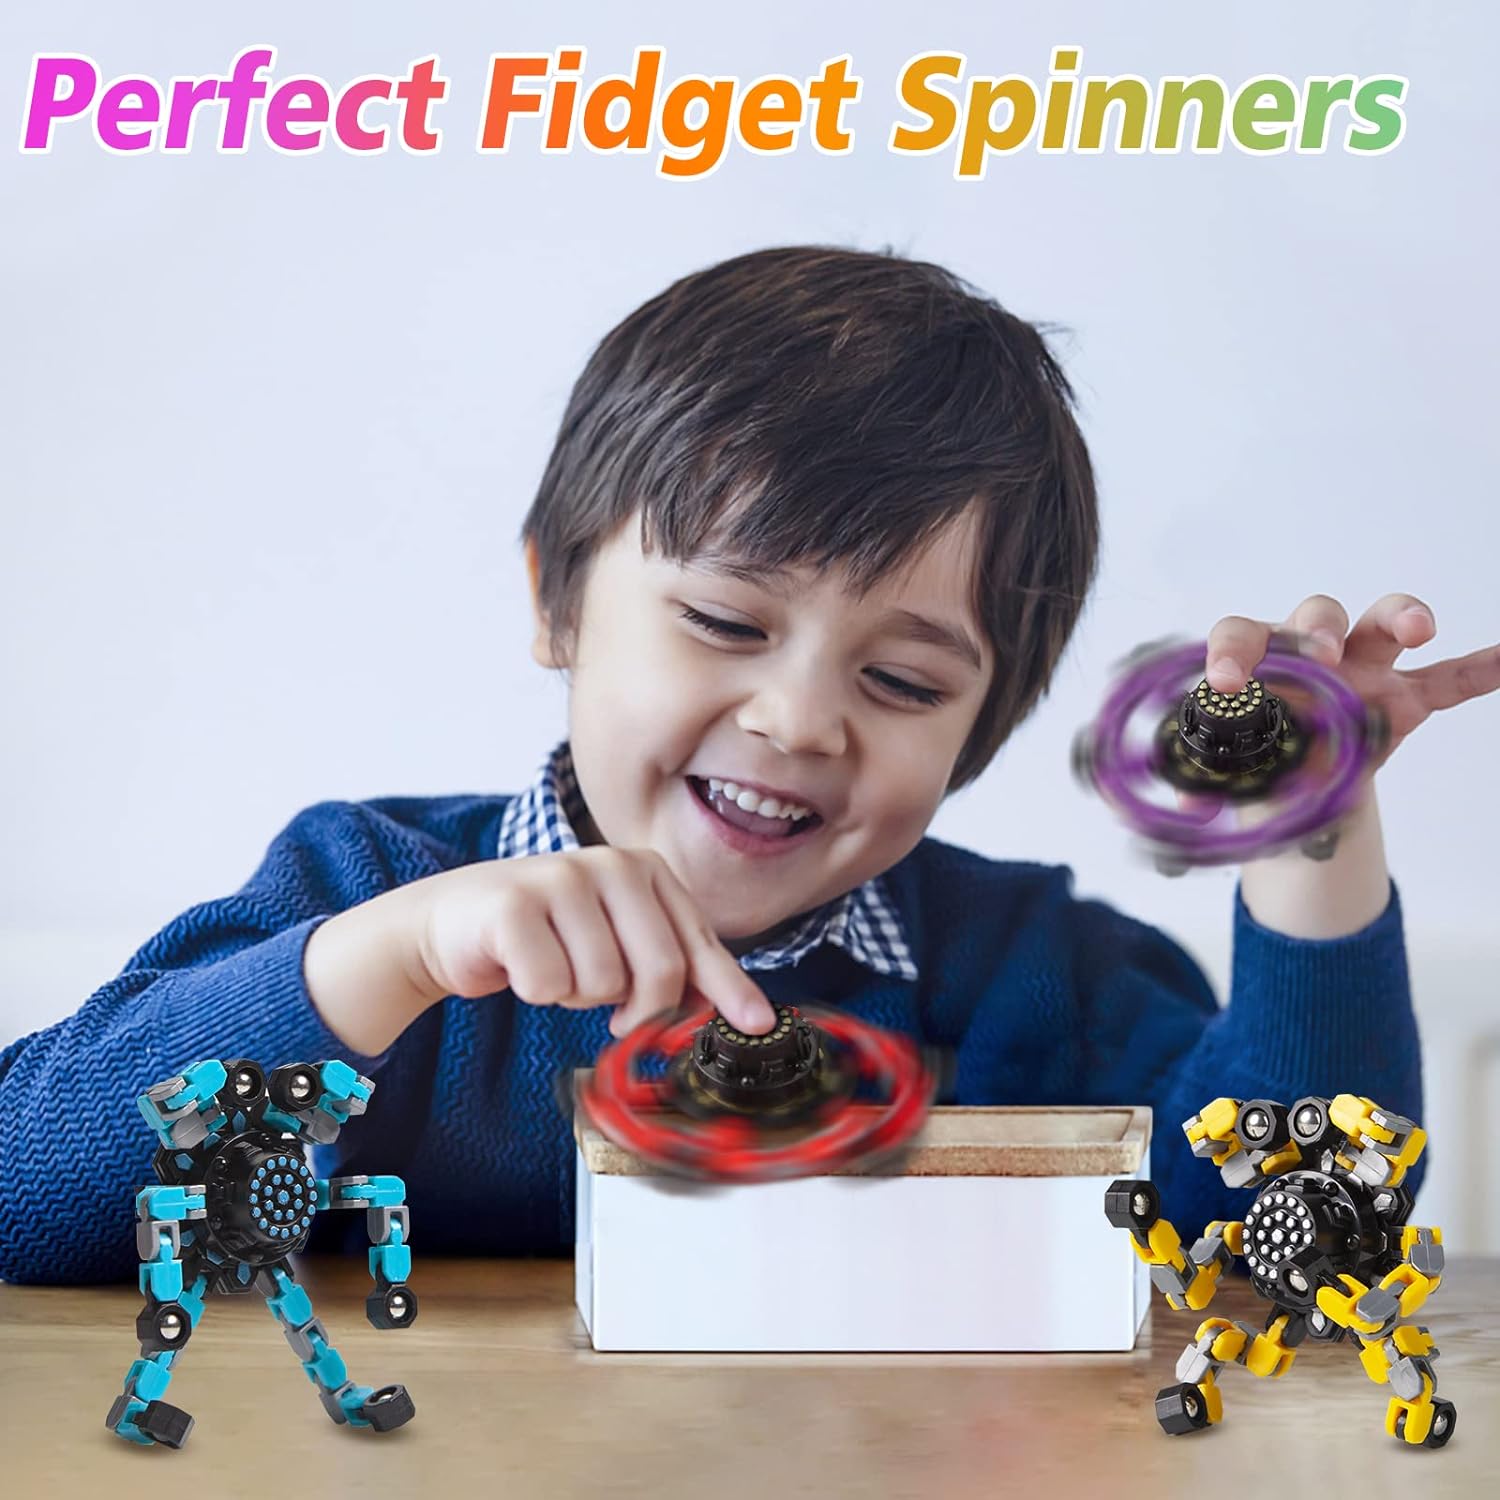 Fidget Spinners 4 Pcs for Kids and Adults Stress Relief Sensory Toy